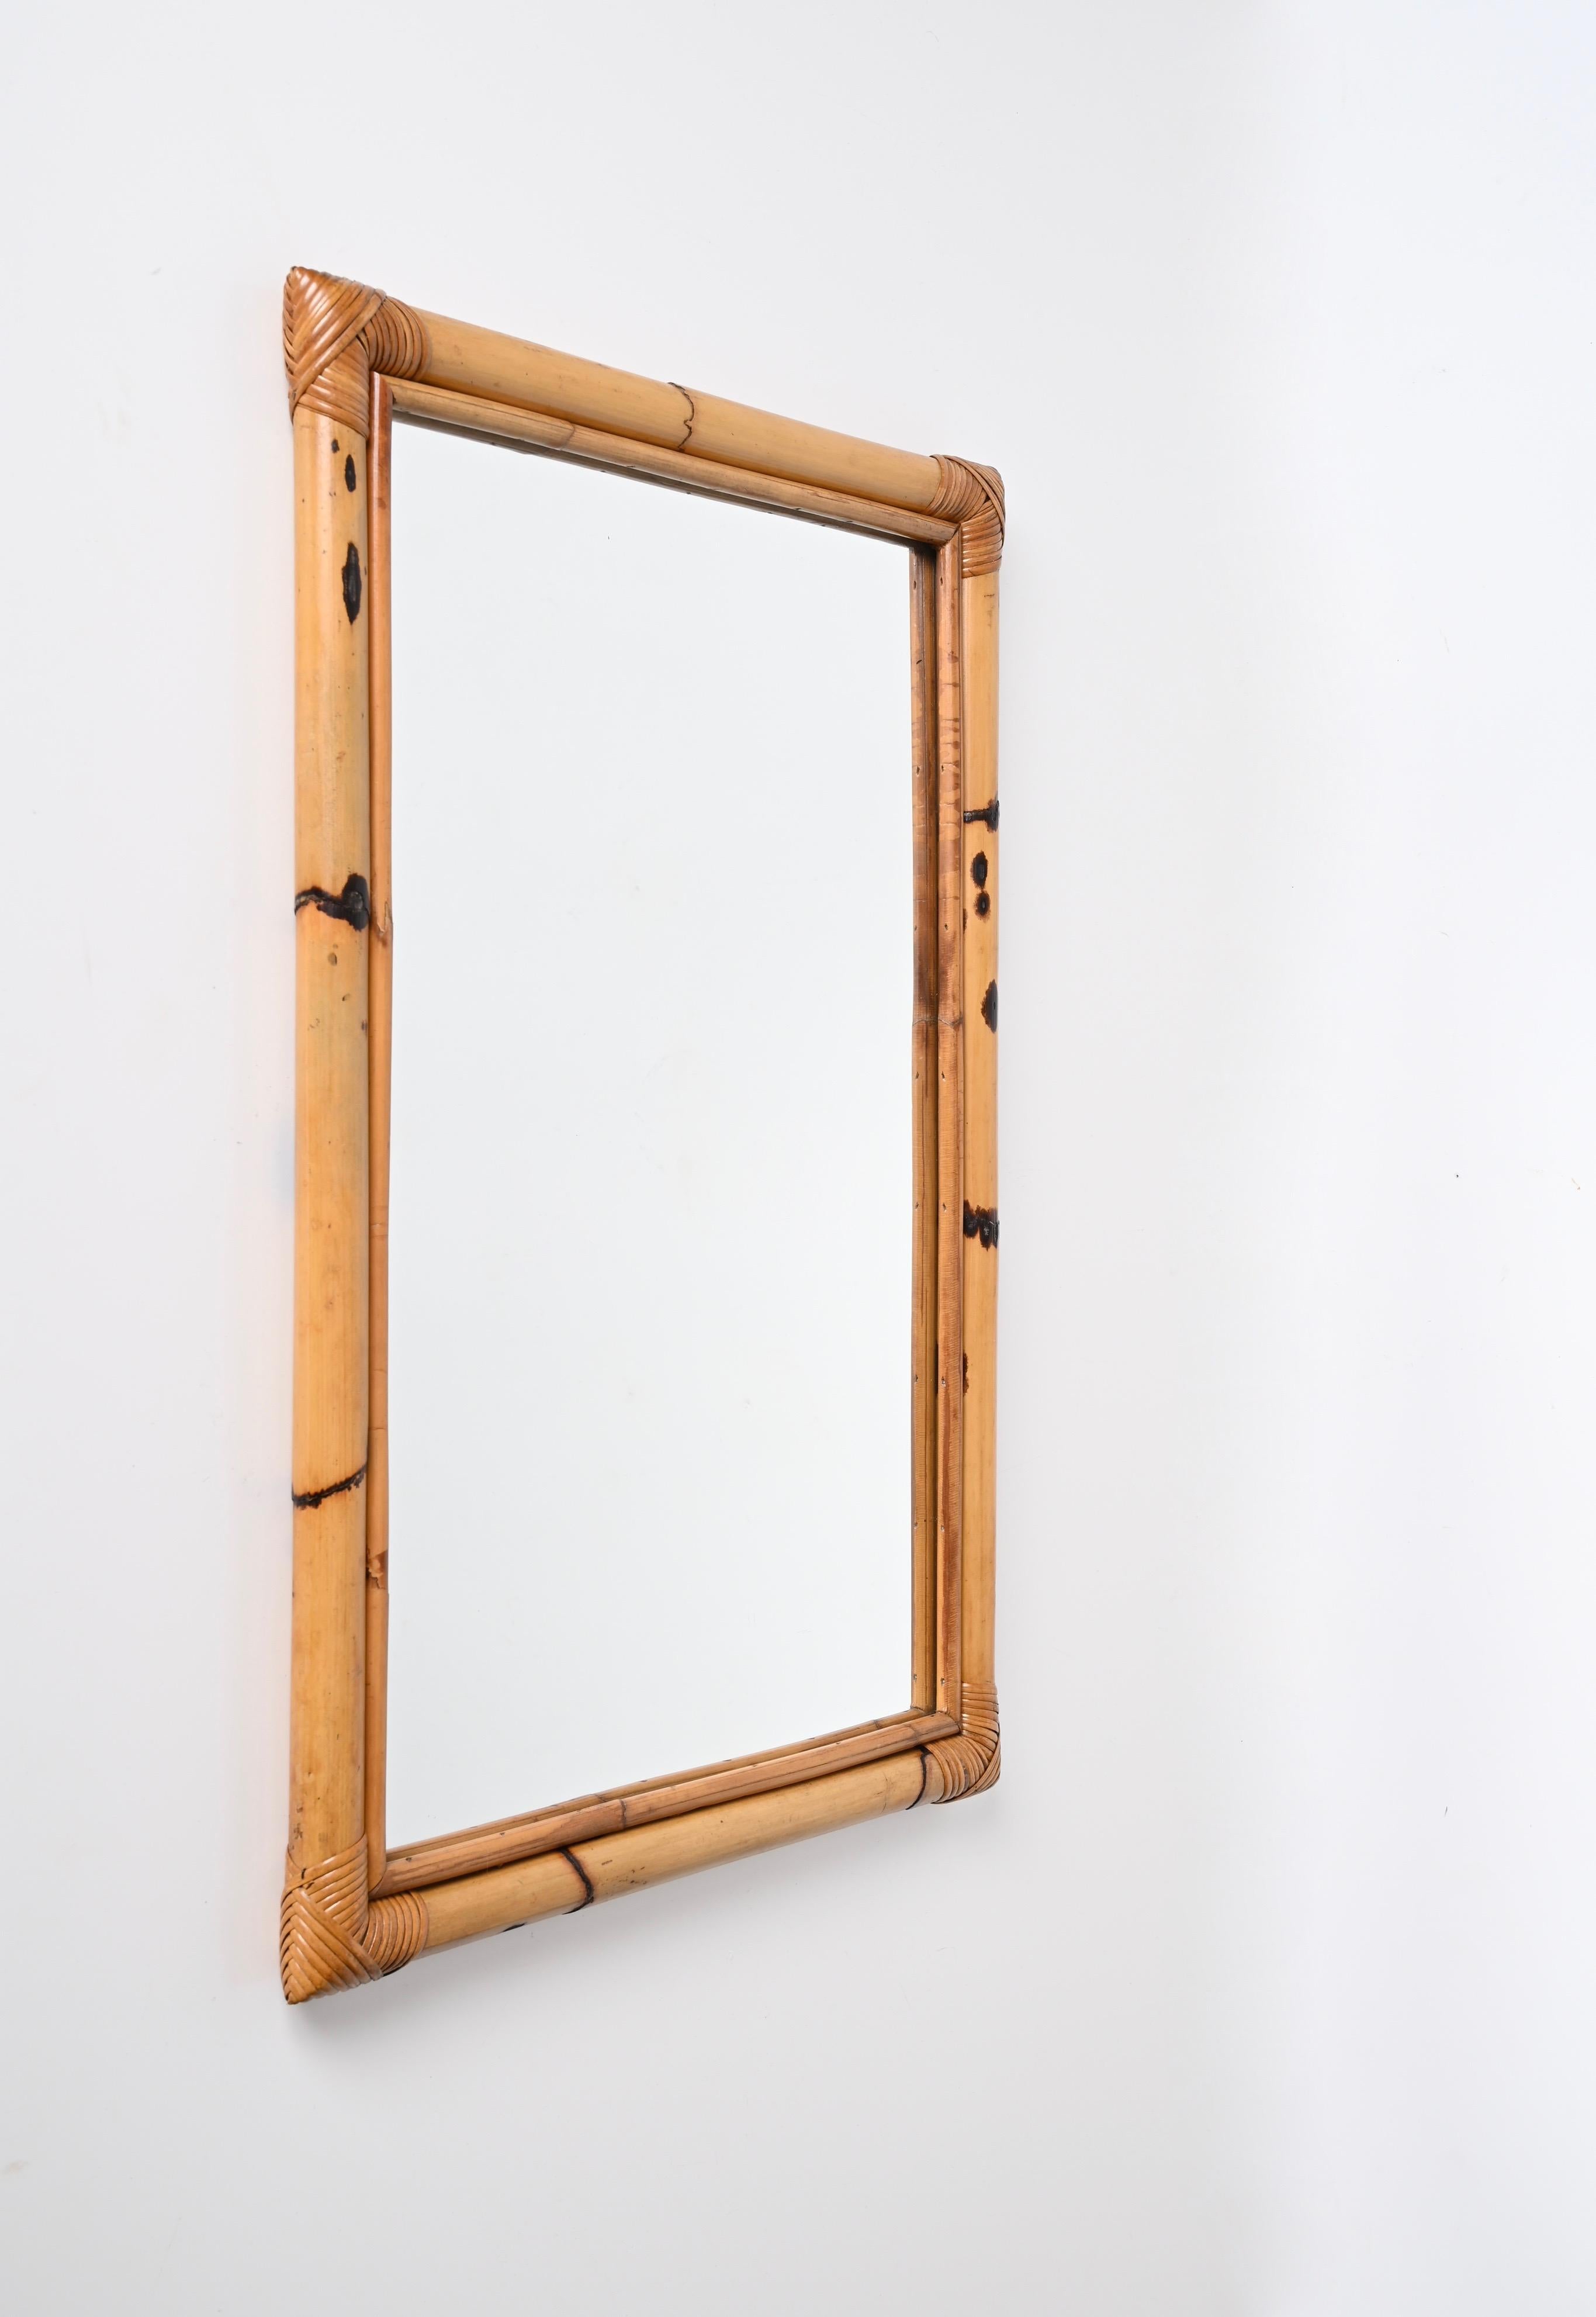 Midcentury Rectangular Mirror with Double Bamboo and Rattan Frame, Italy 1970s For Sale 3